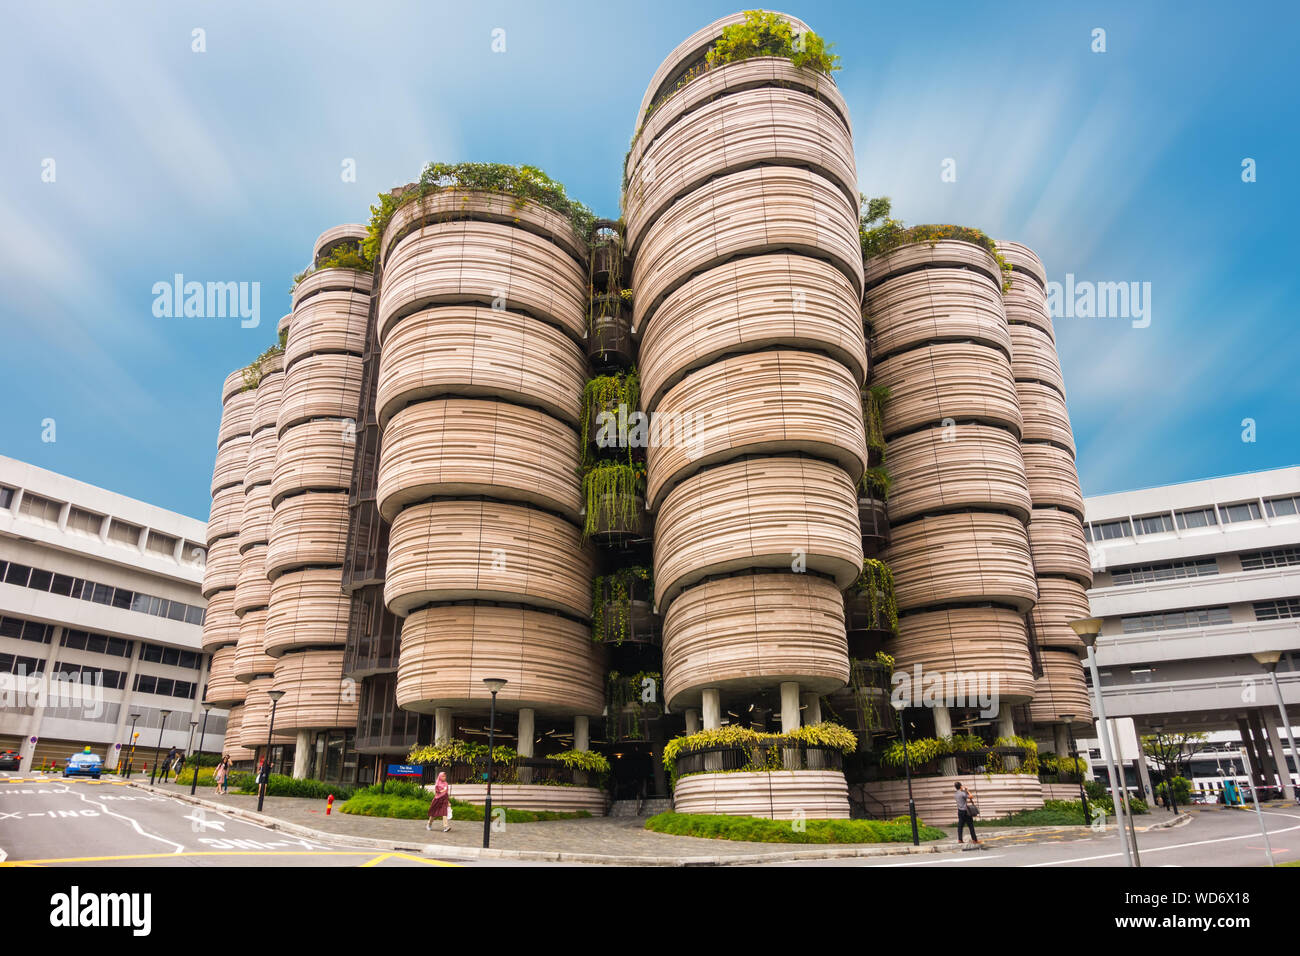 SINGAPORE - OCTOBER 24, 2016: Modern Architectural Building of Nanyang Technological University in Singapore. Cityscape Landmark of Contemporary Archi Stock Photo